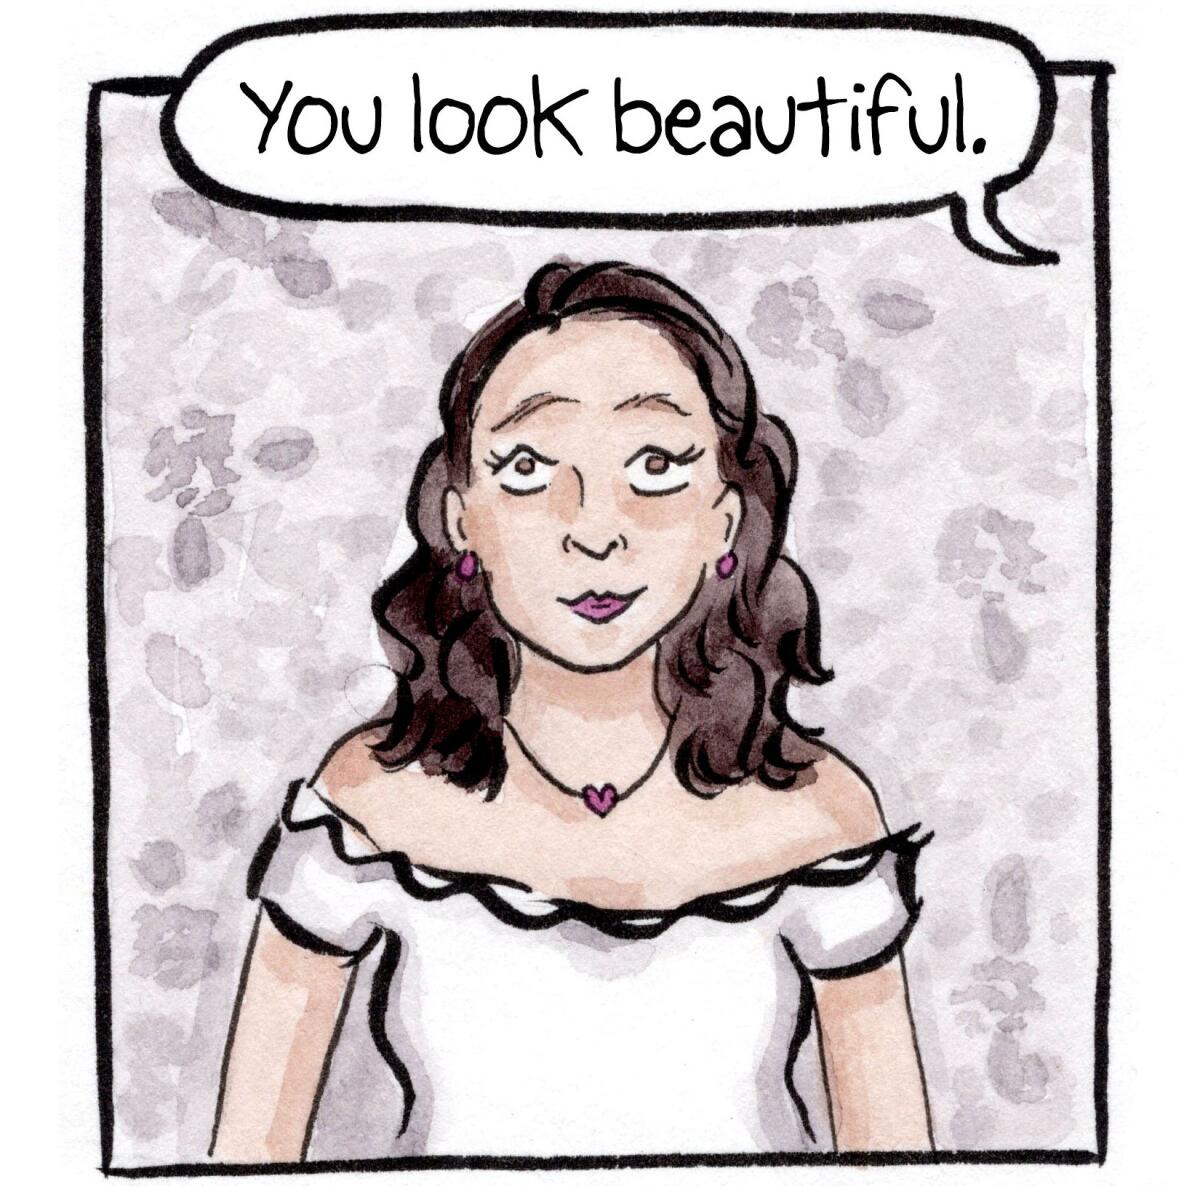 Someone says, "You look beautiful," to a woman in a wedding dress.